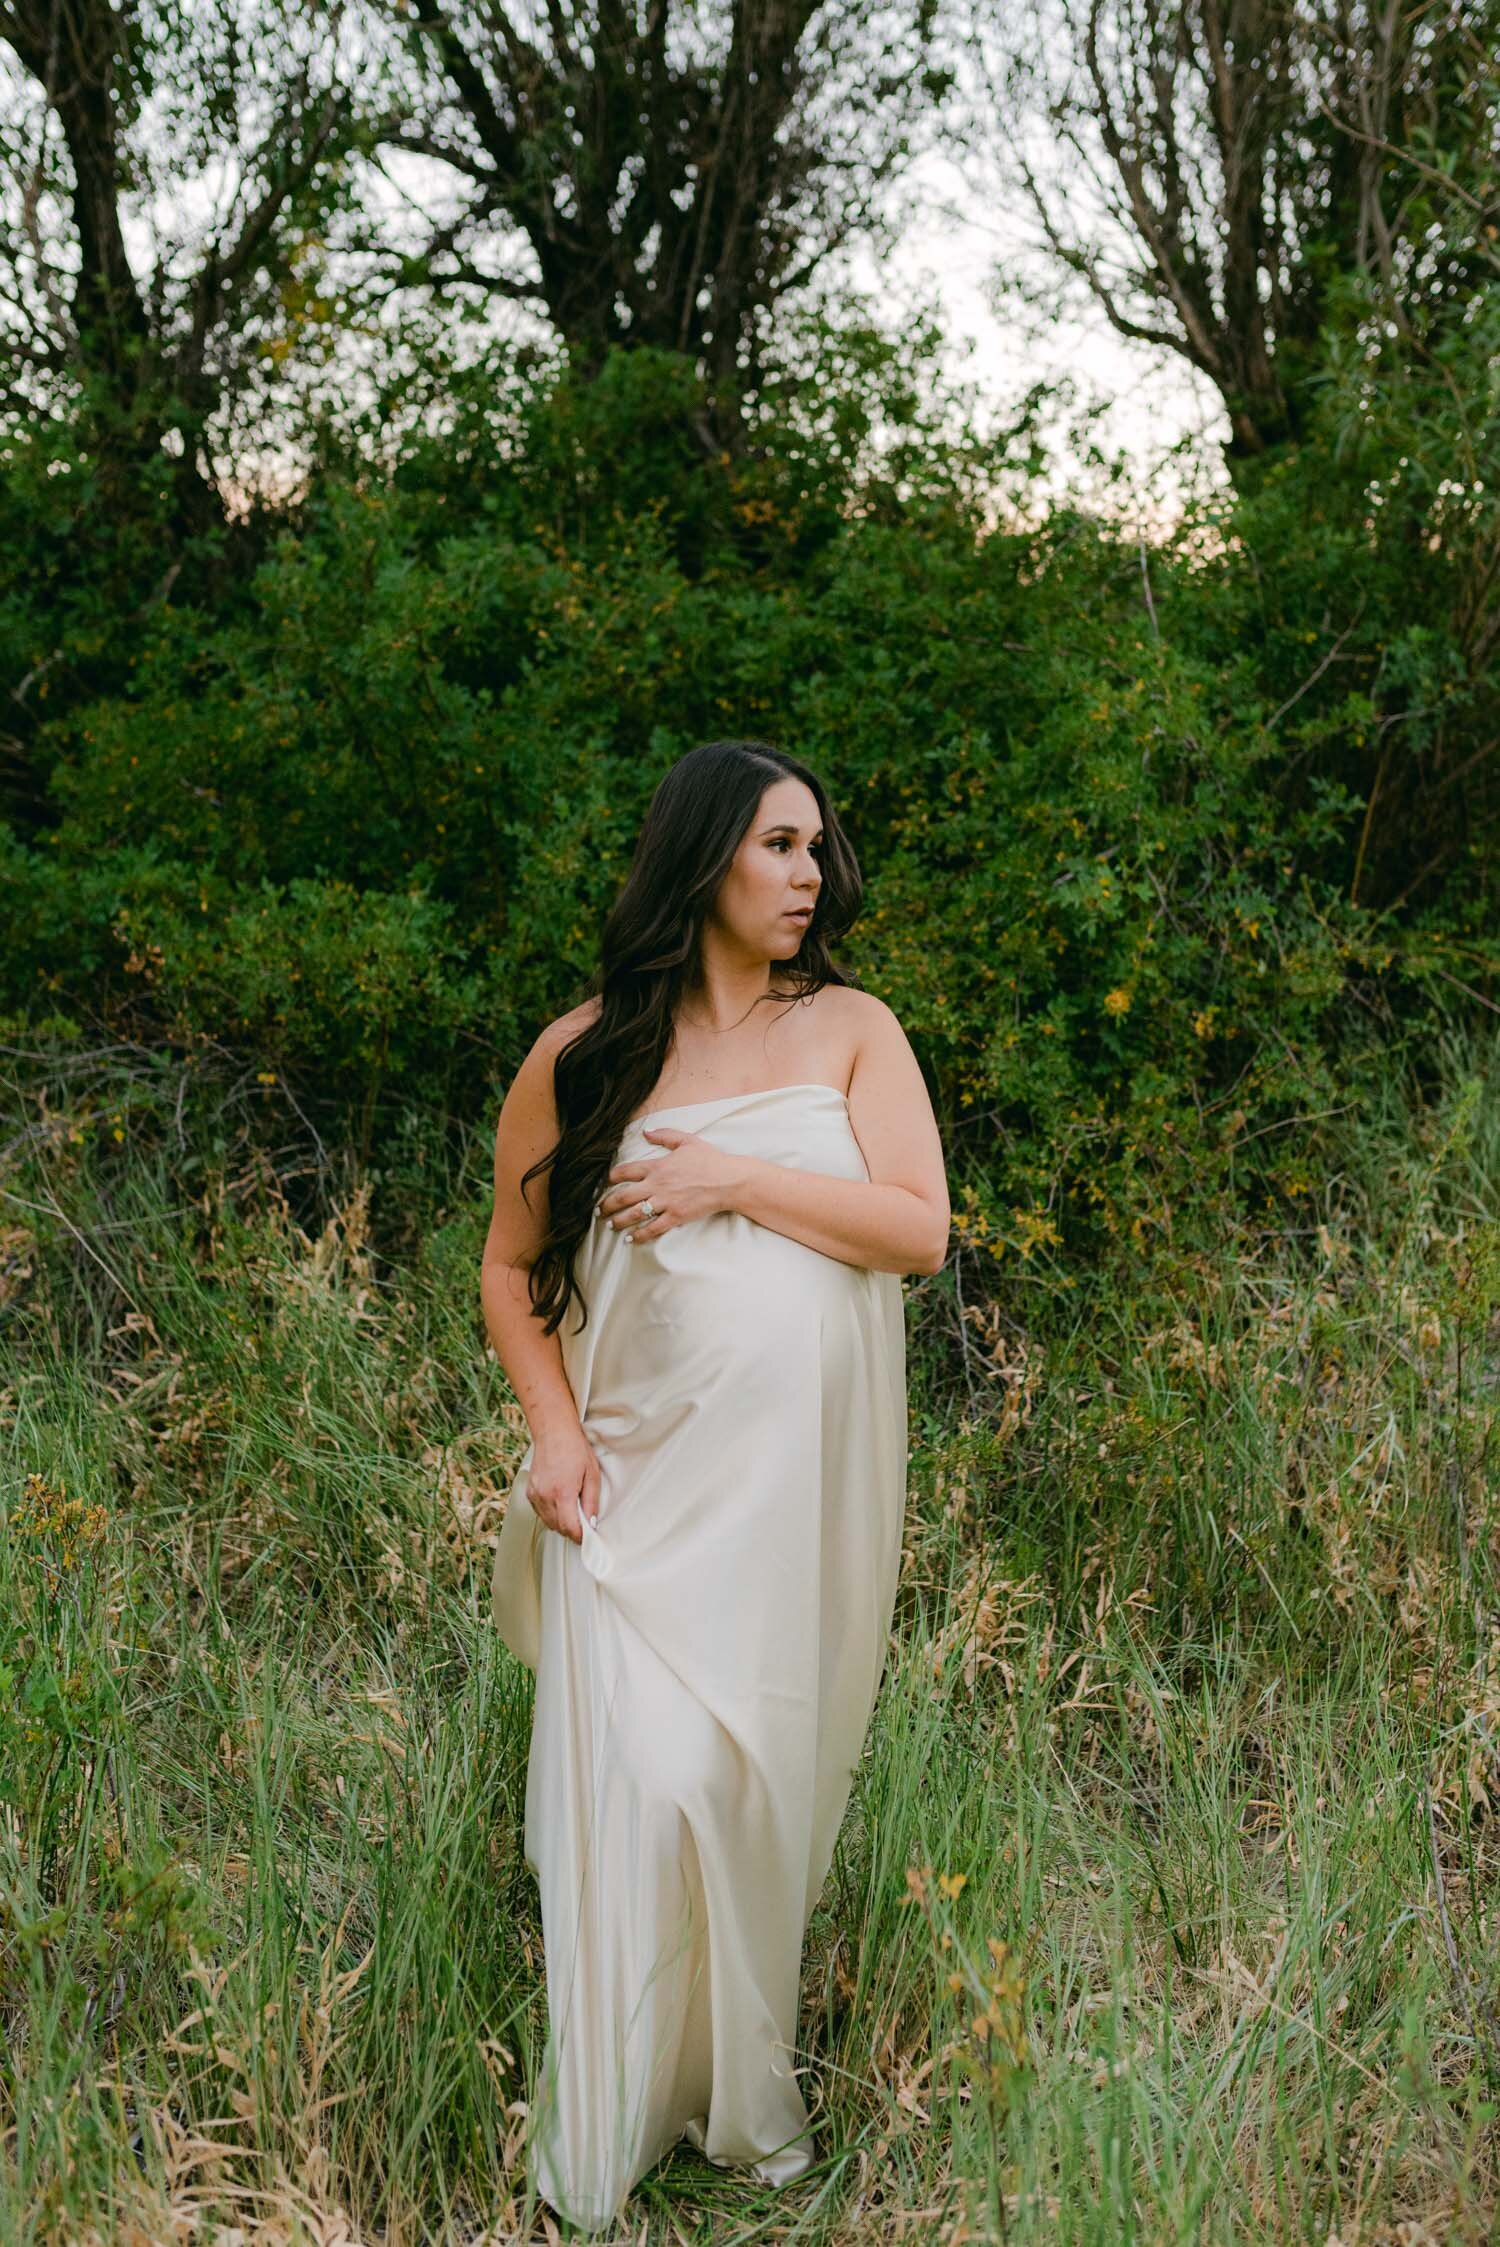 Maternity session in the meadows. Mom is draped in off white silk-like fabric